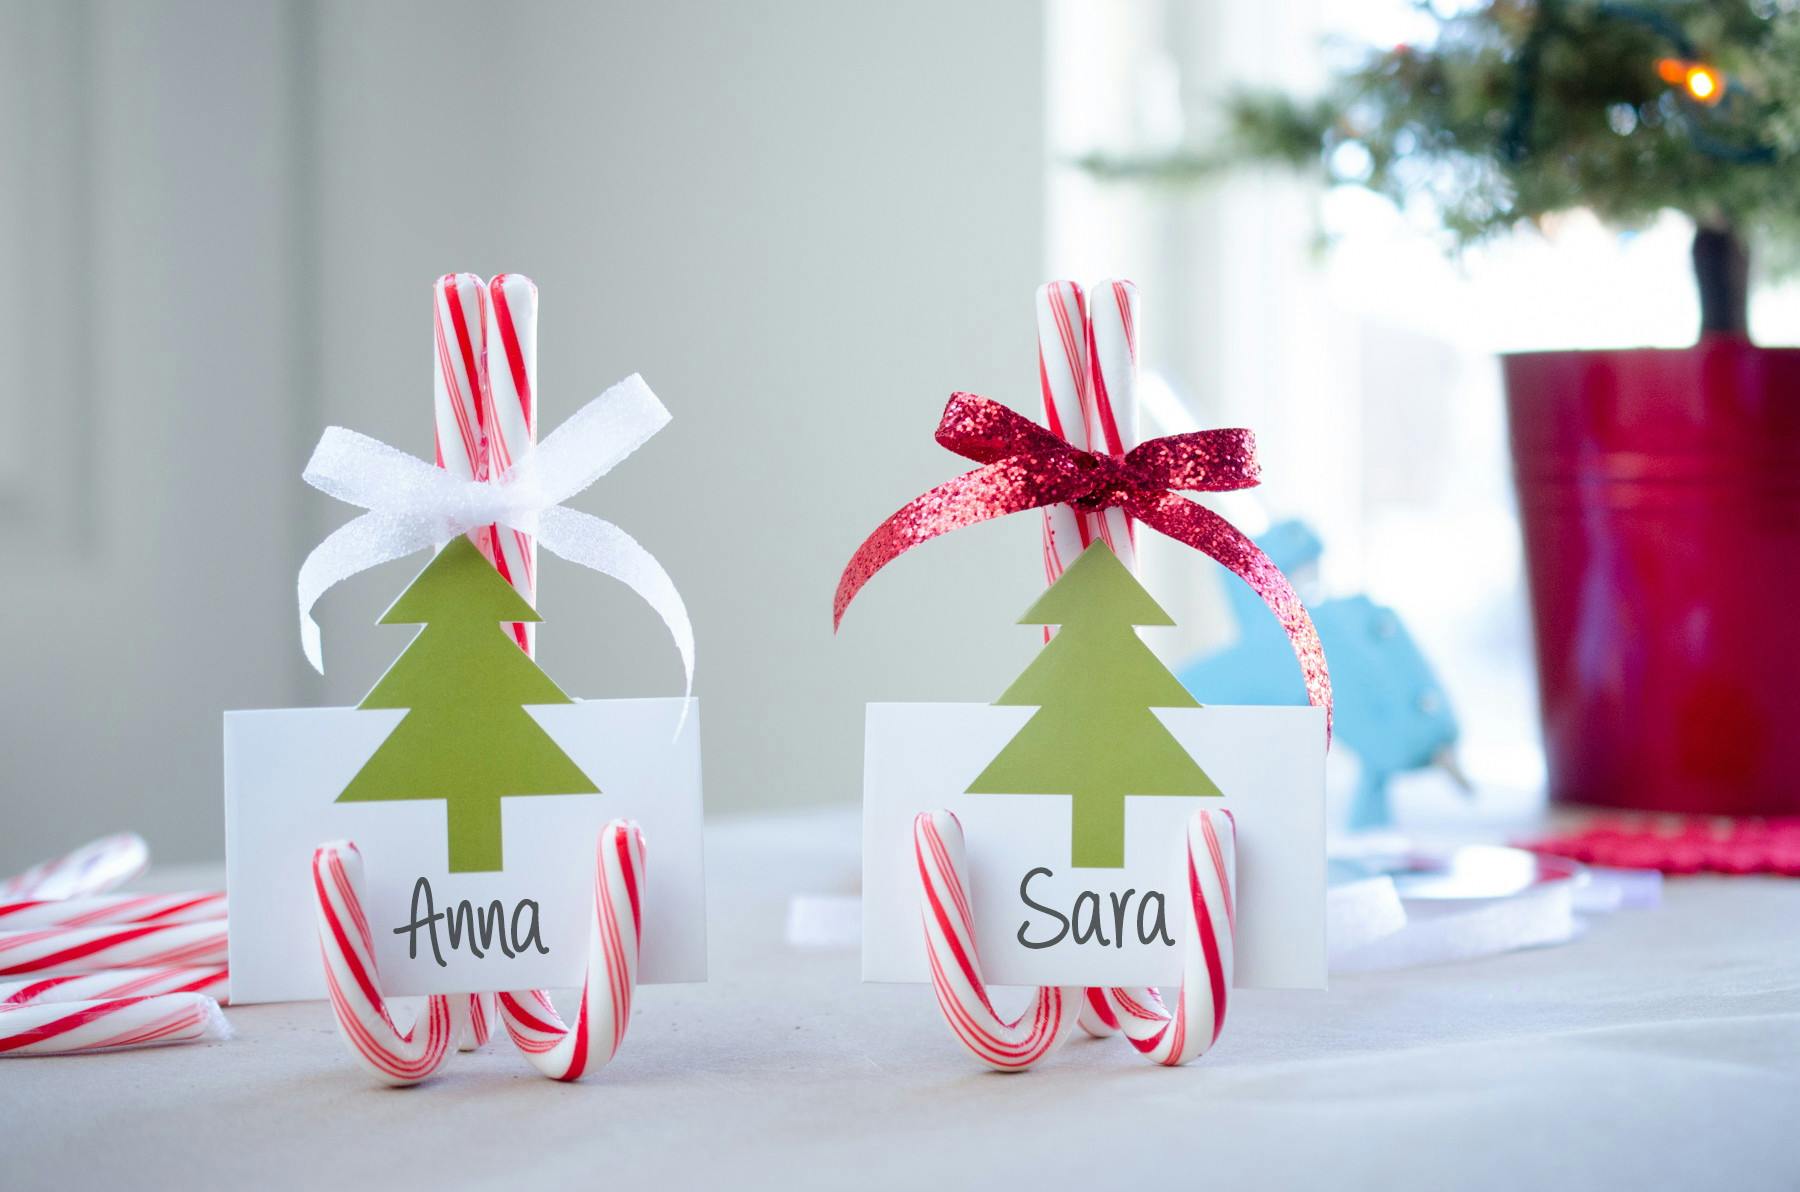 Place holder cards saying Anna and Sara sitting inside stands made from 3 candy canes